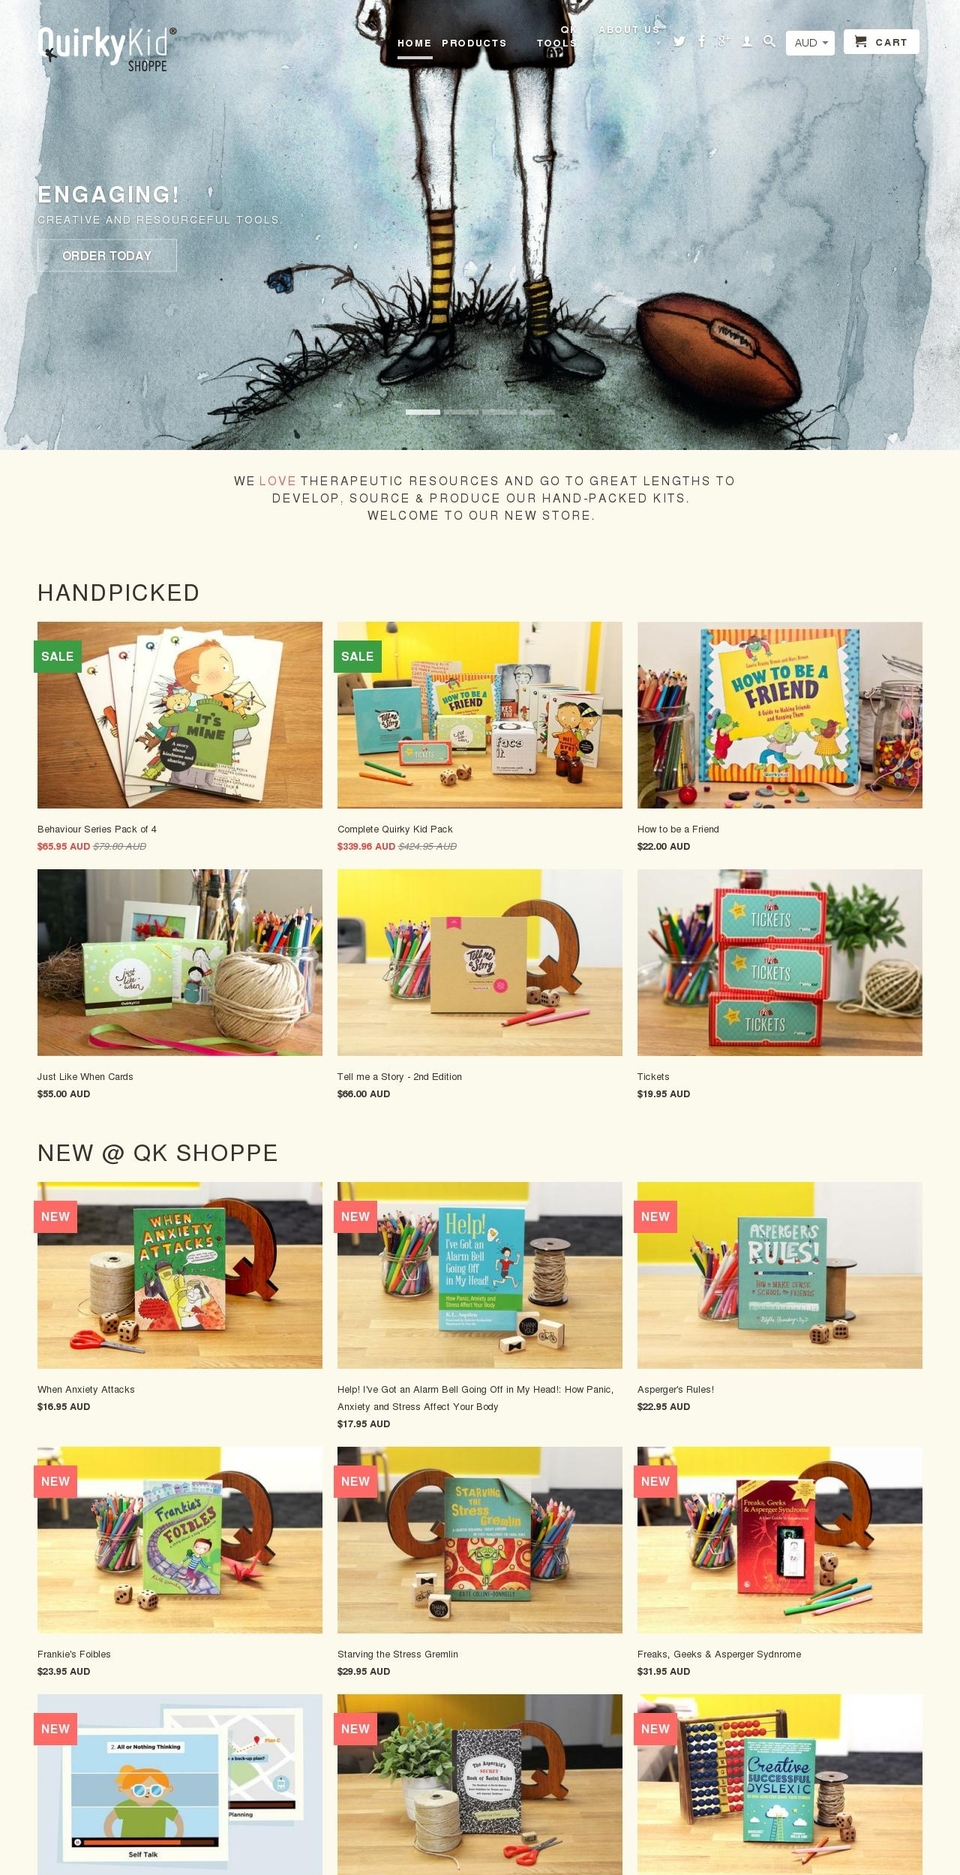 December Shopify theme site example quirkykid.ca